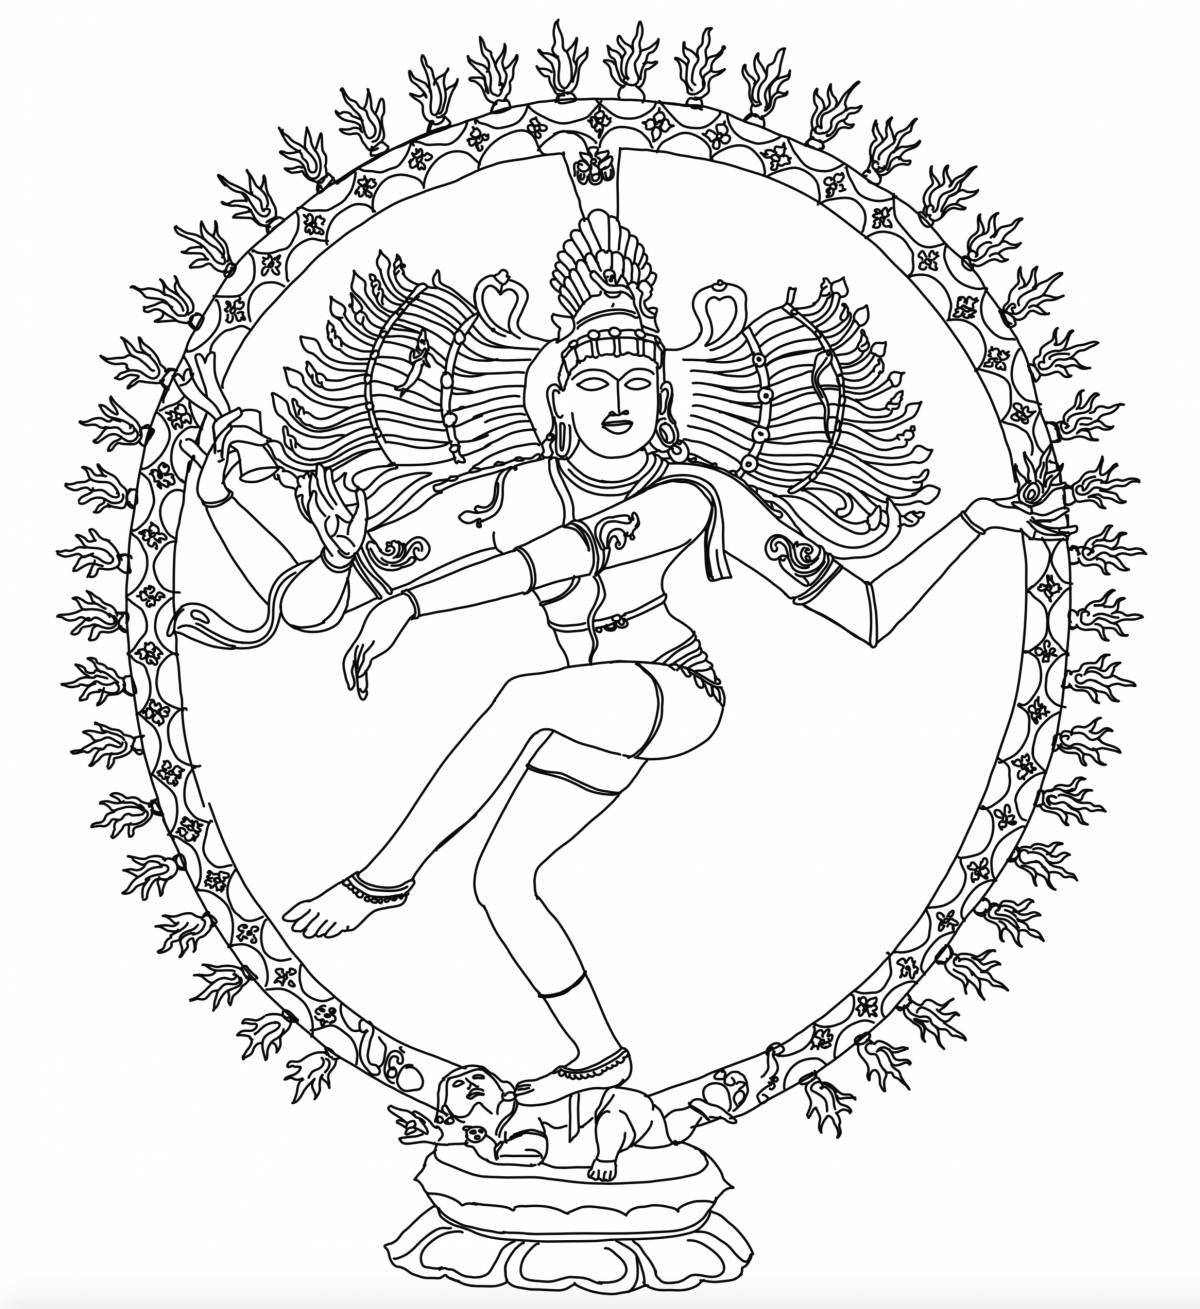 Shiva's live coloring page